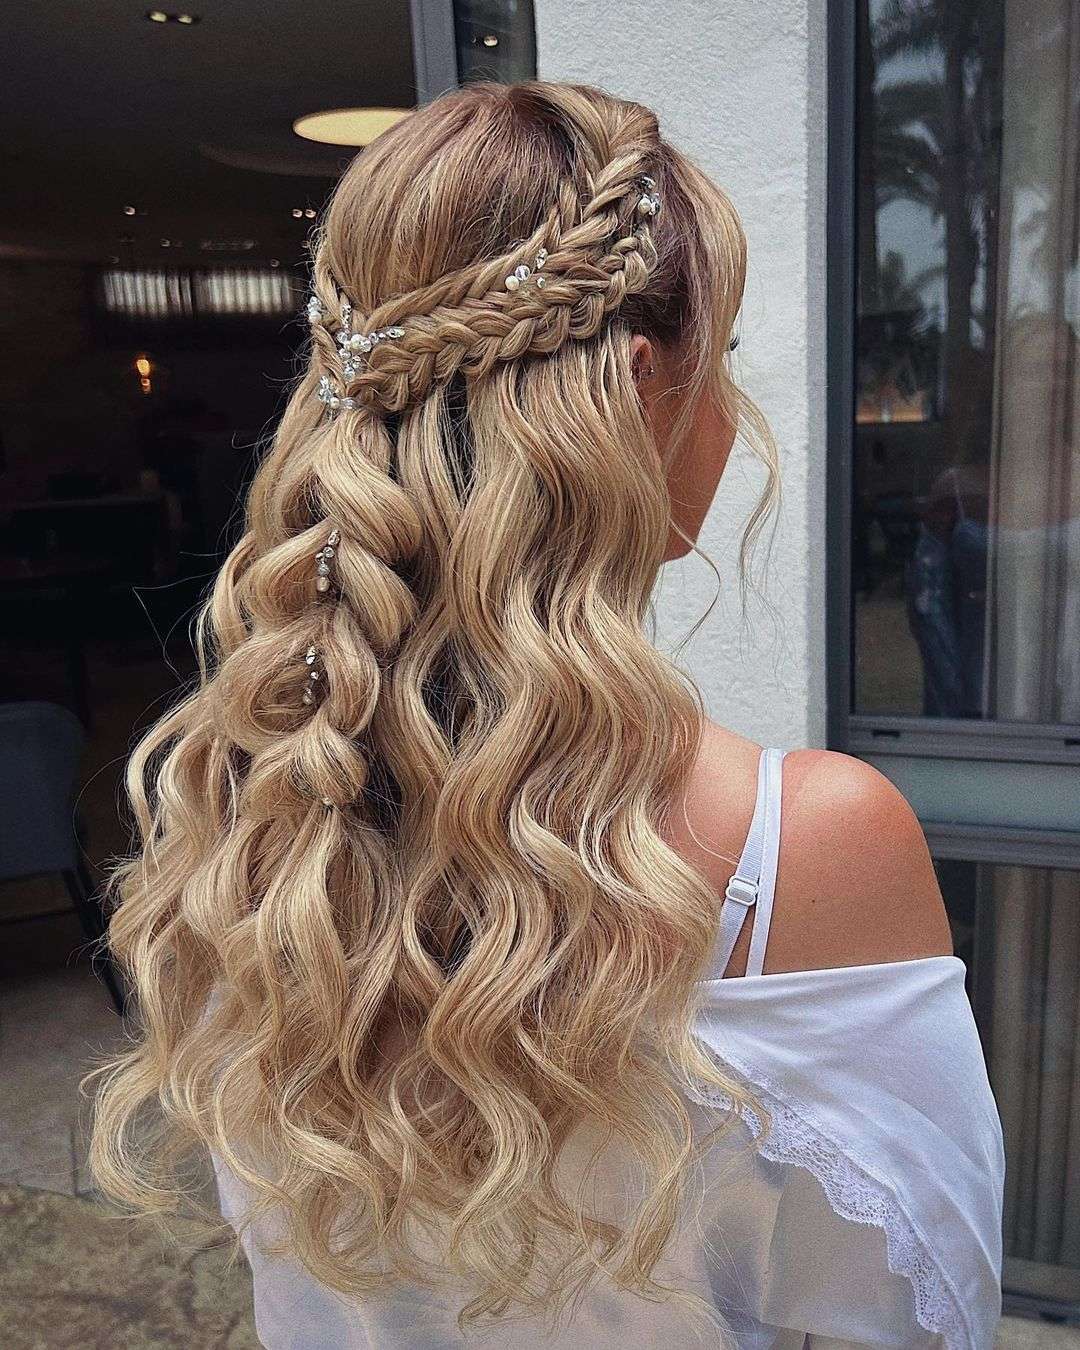 This Half-Up Bun Is Going to Be Your New Favorite Wedding Guest Hairstyle -  Lulus.com Fashion Blog